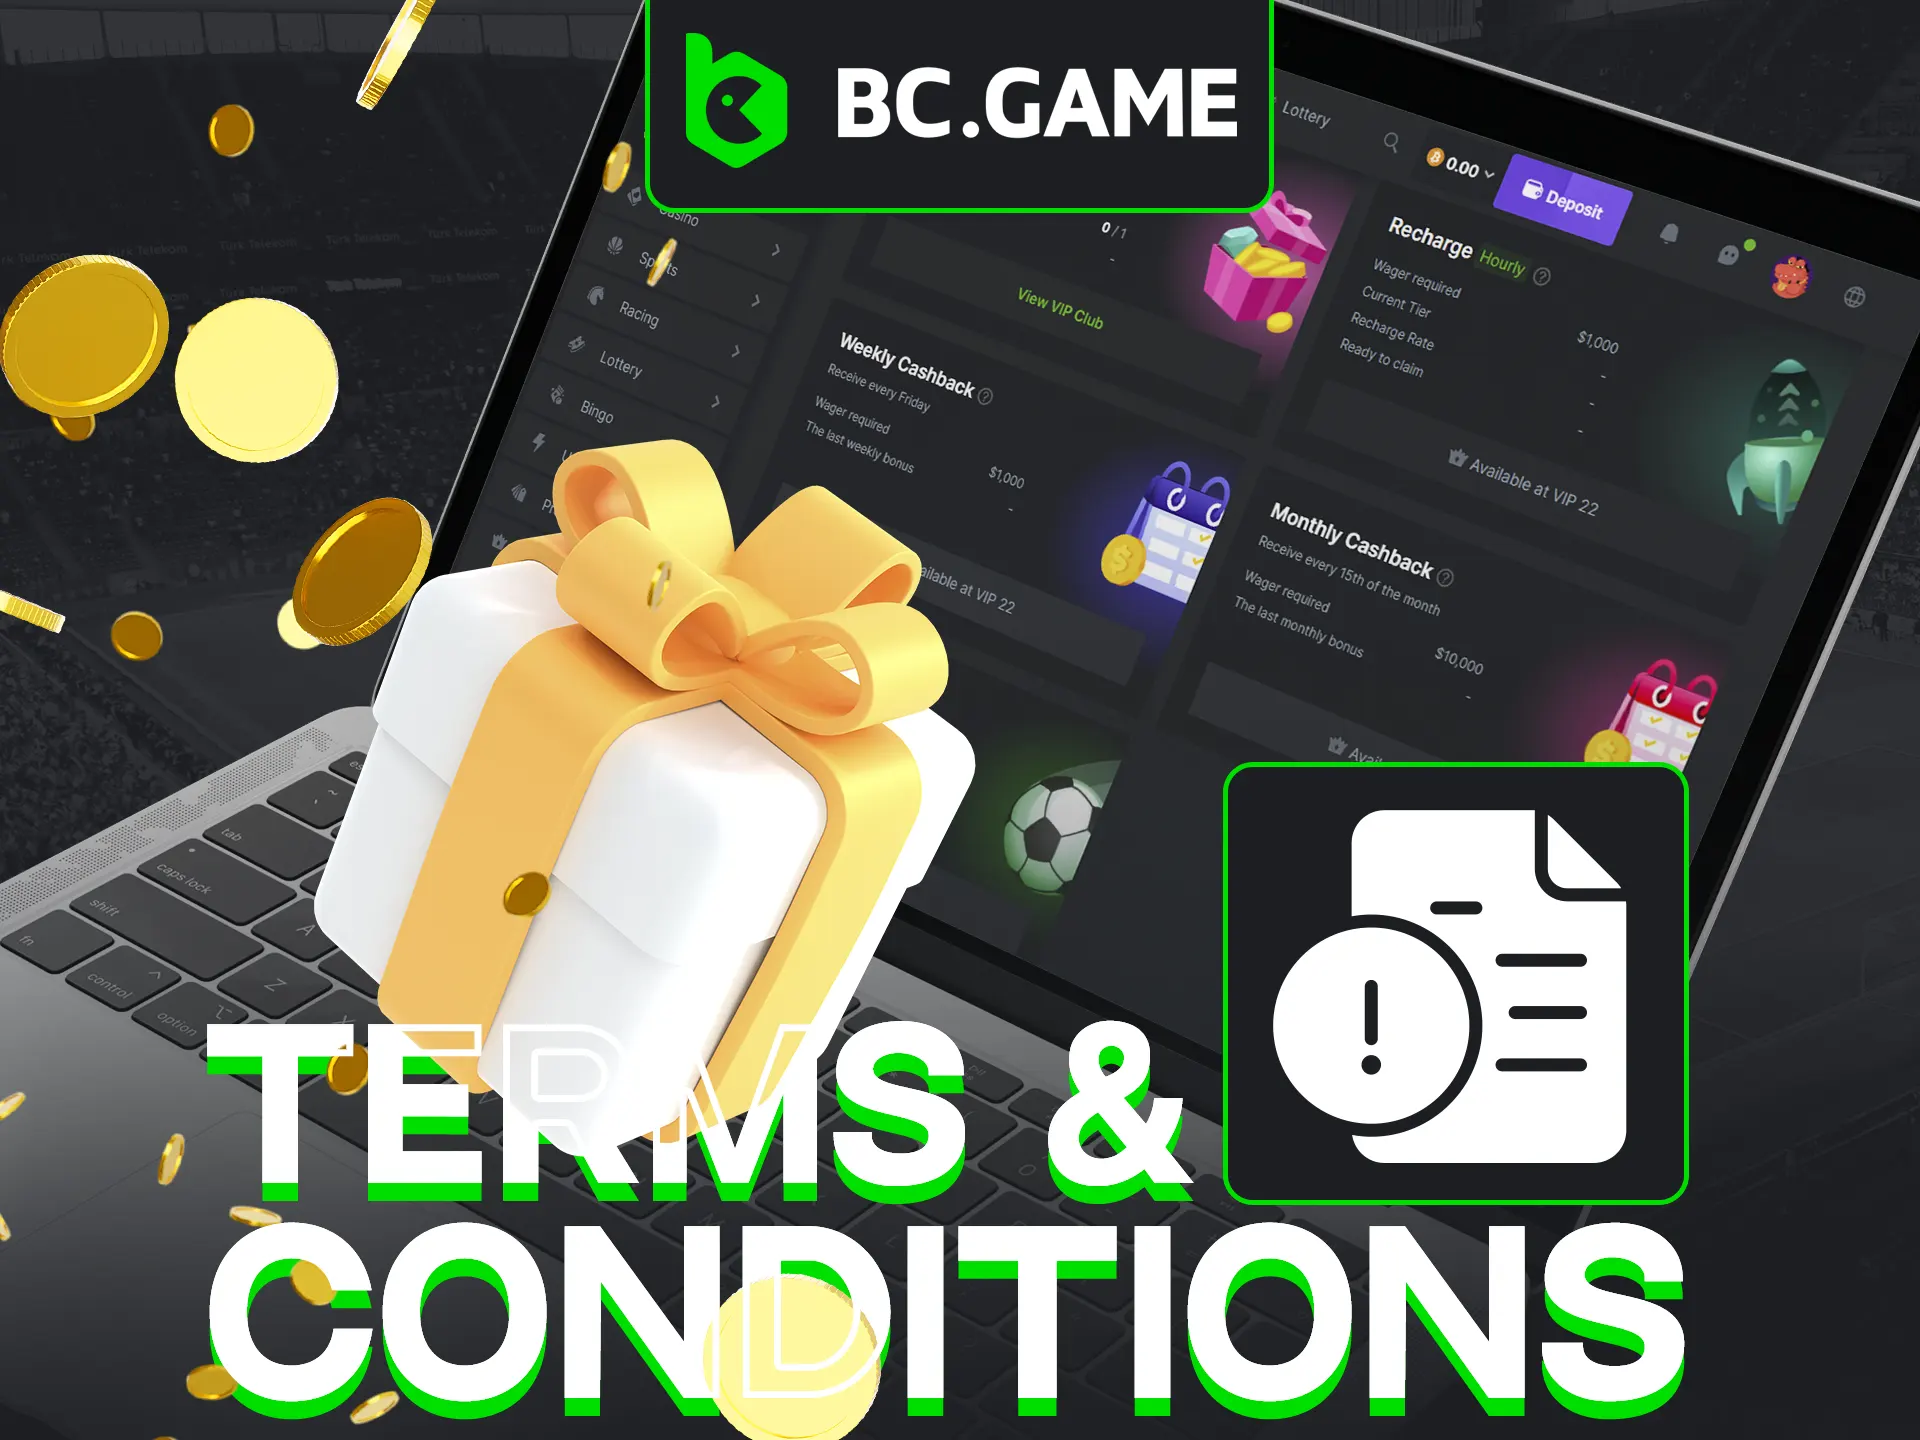 At BC Game to use bonuses you need to follow it`s terms and conditions.